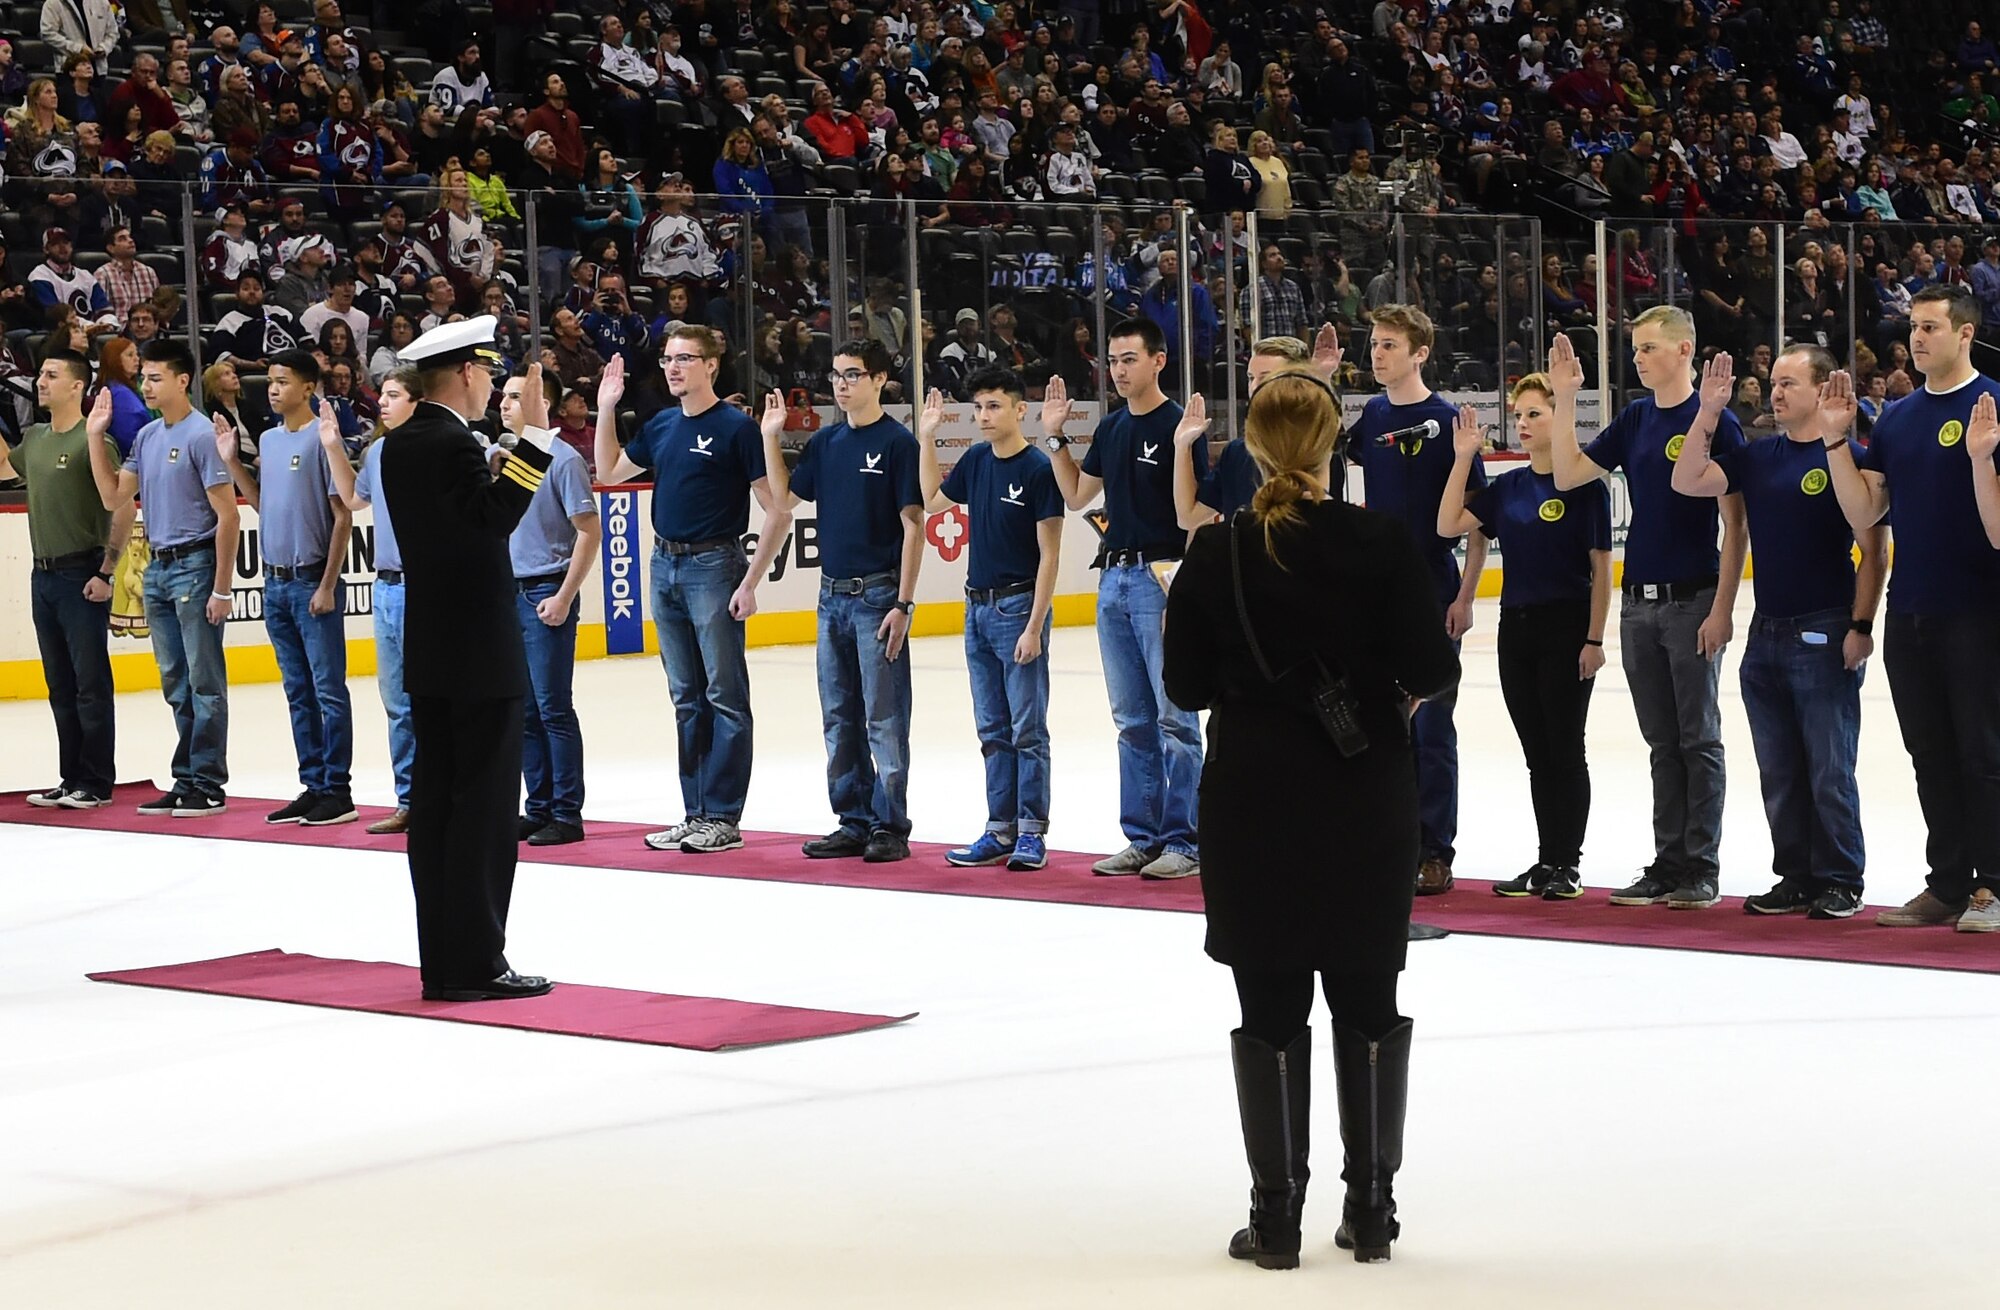 Prospective military members swore in during intermission at the Colorado Avalanche hockey game March 5, 2016, at the Pepsi Center in Denver, Colo. The recruits took the ice during intermission to be sworn into the United States military during the Avalanche “Military Appreciation Day.” (U.S. Air Force photo by Airman 1st Class Luke W. Nowakowski/Released)